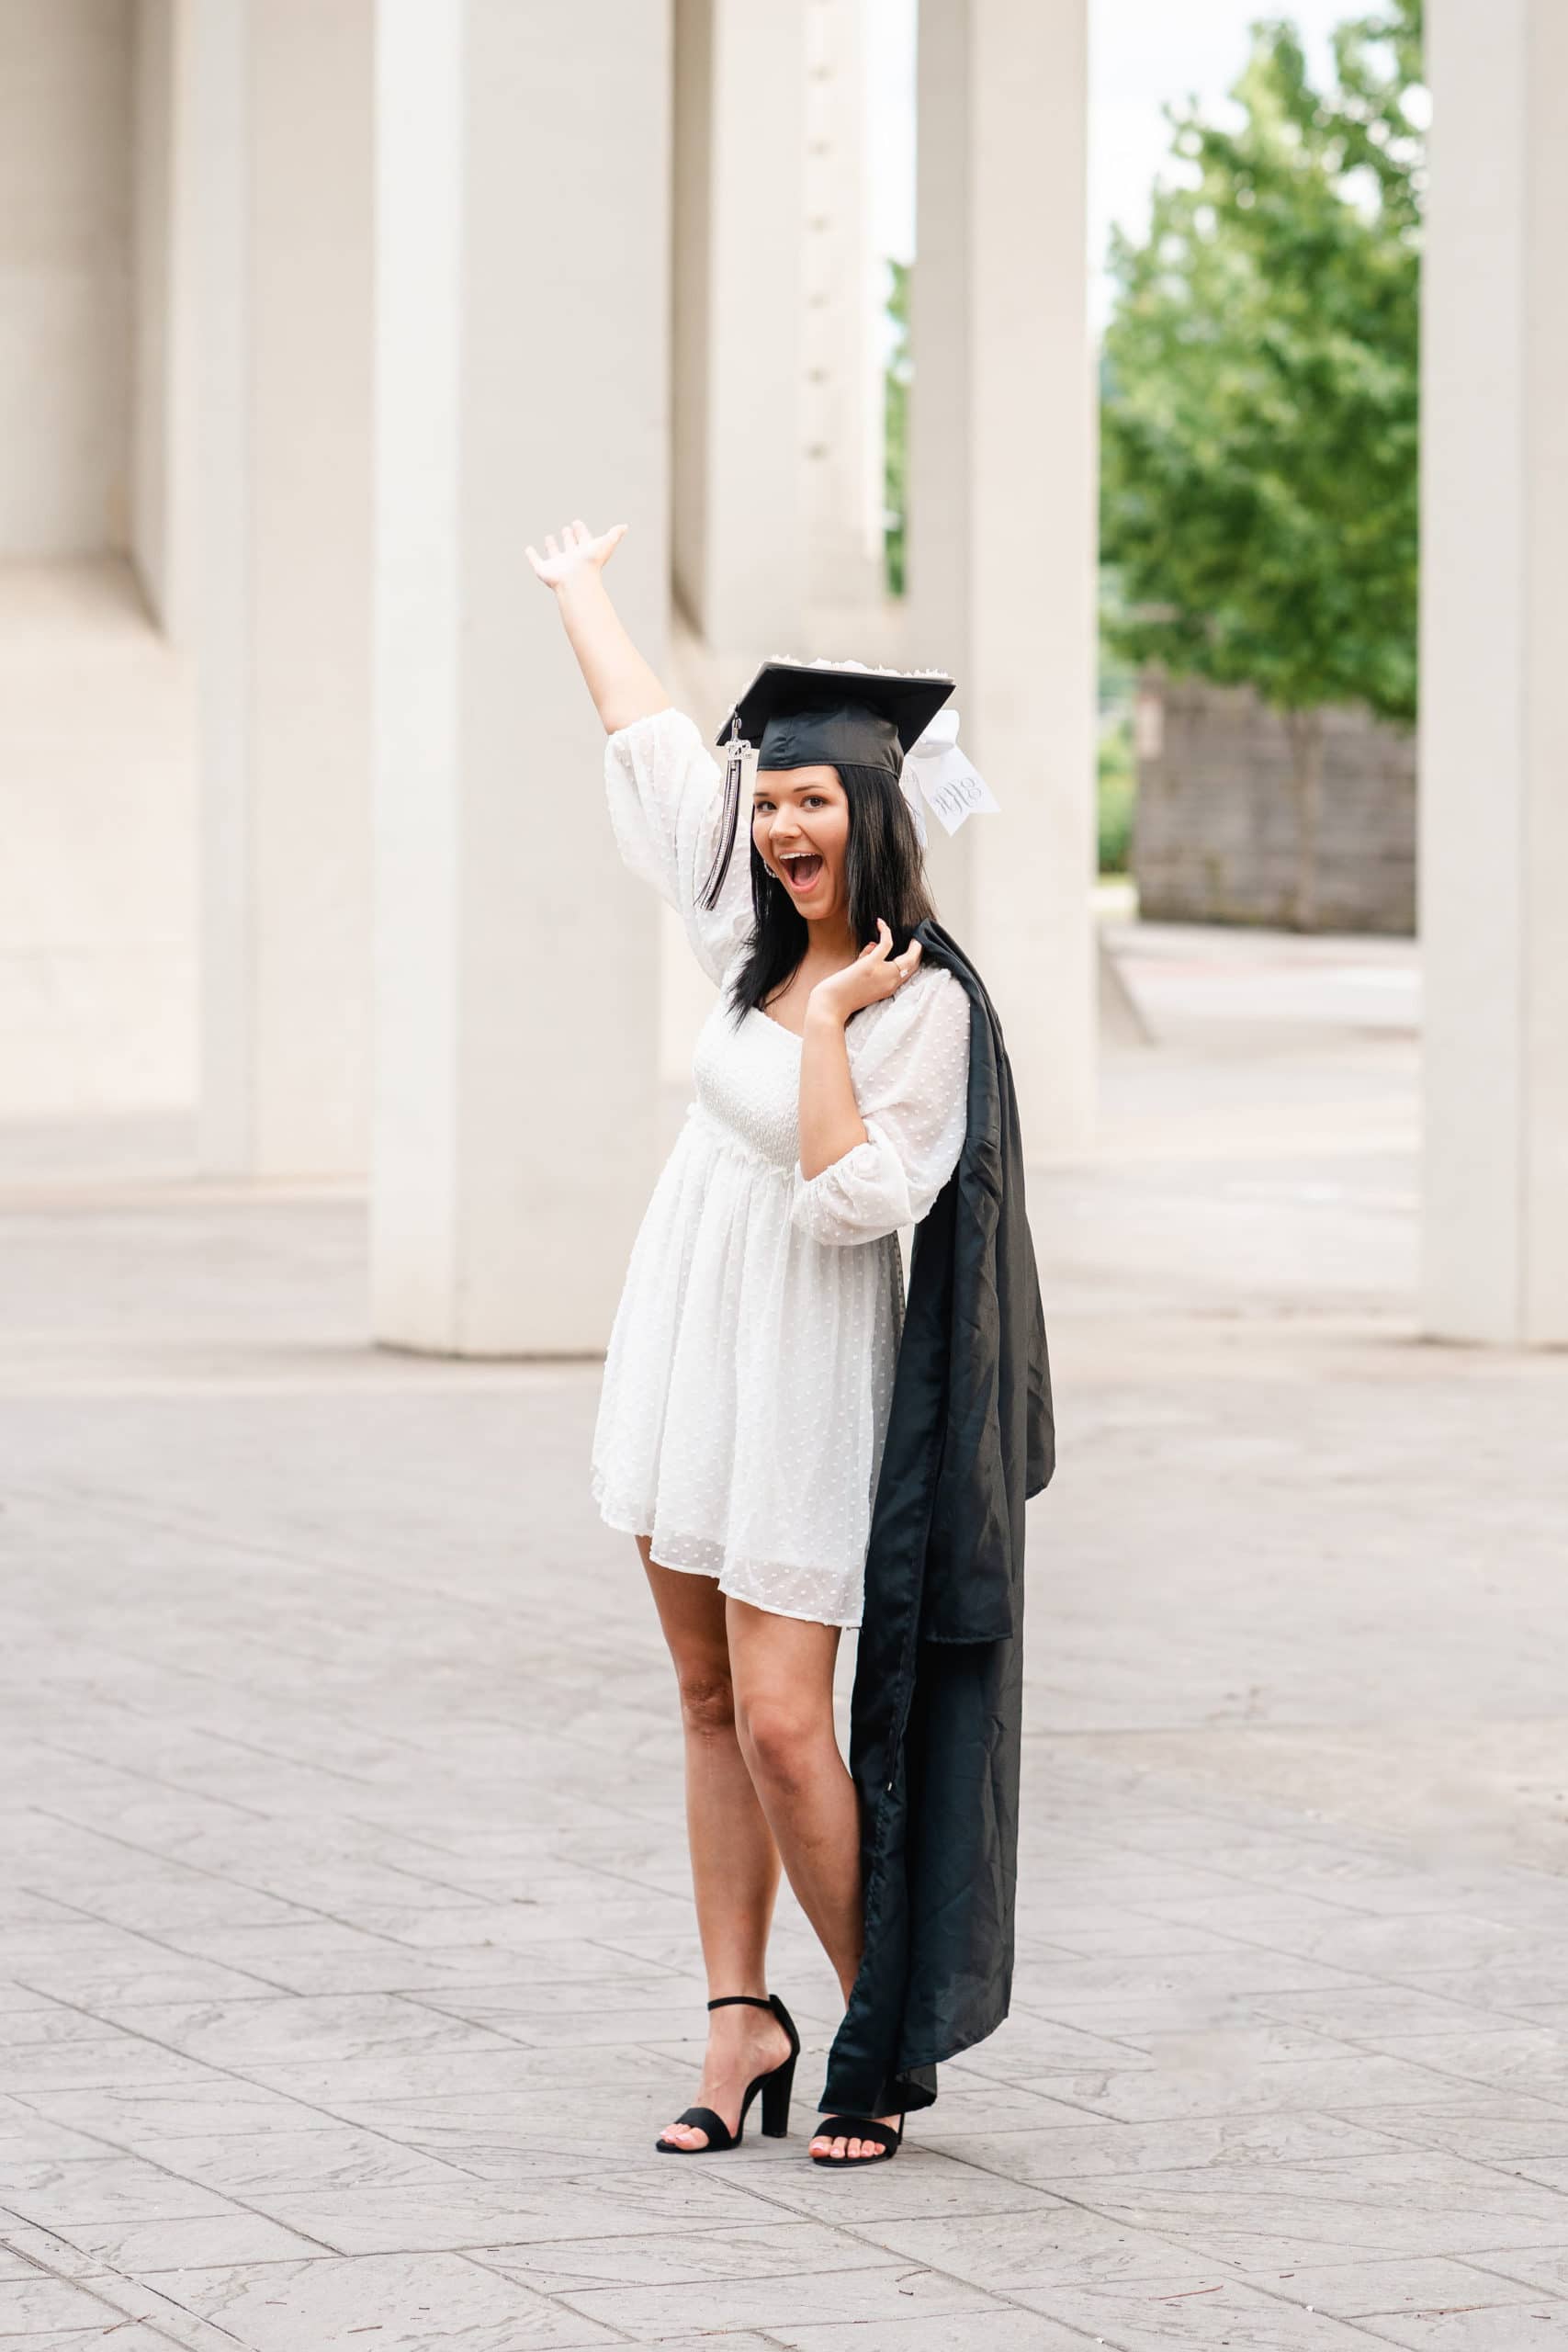 Cap and Gown portraits, Chattanooga, TN